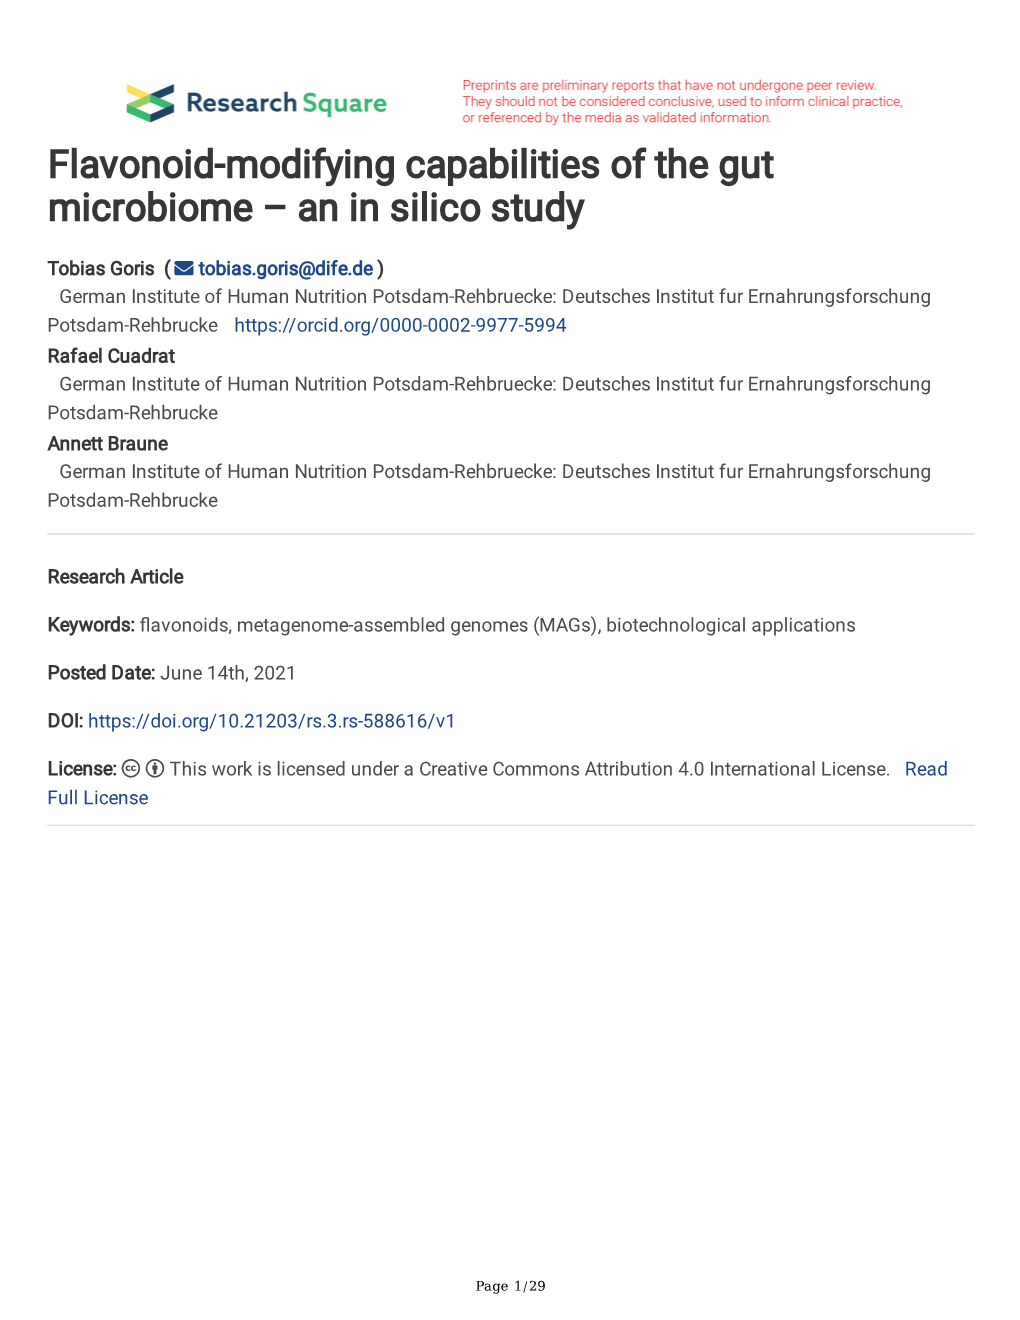 Flavonoid-Modifying Capabilities of the Gut Microbiome – an in Silico Study